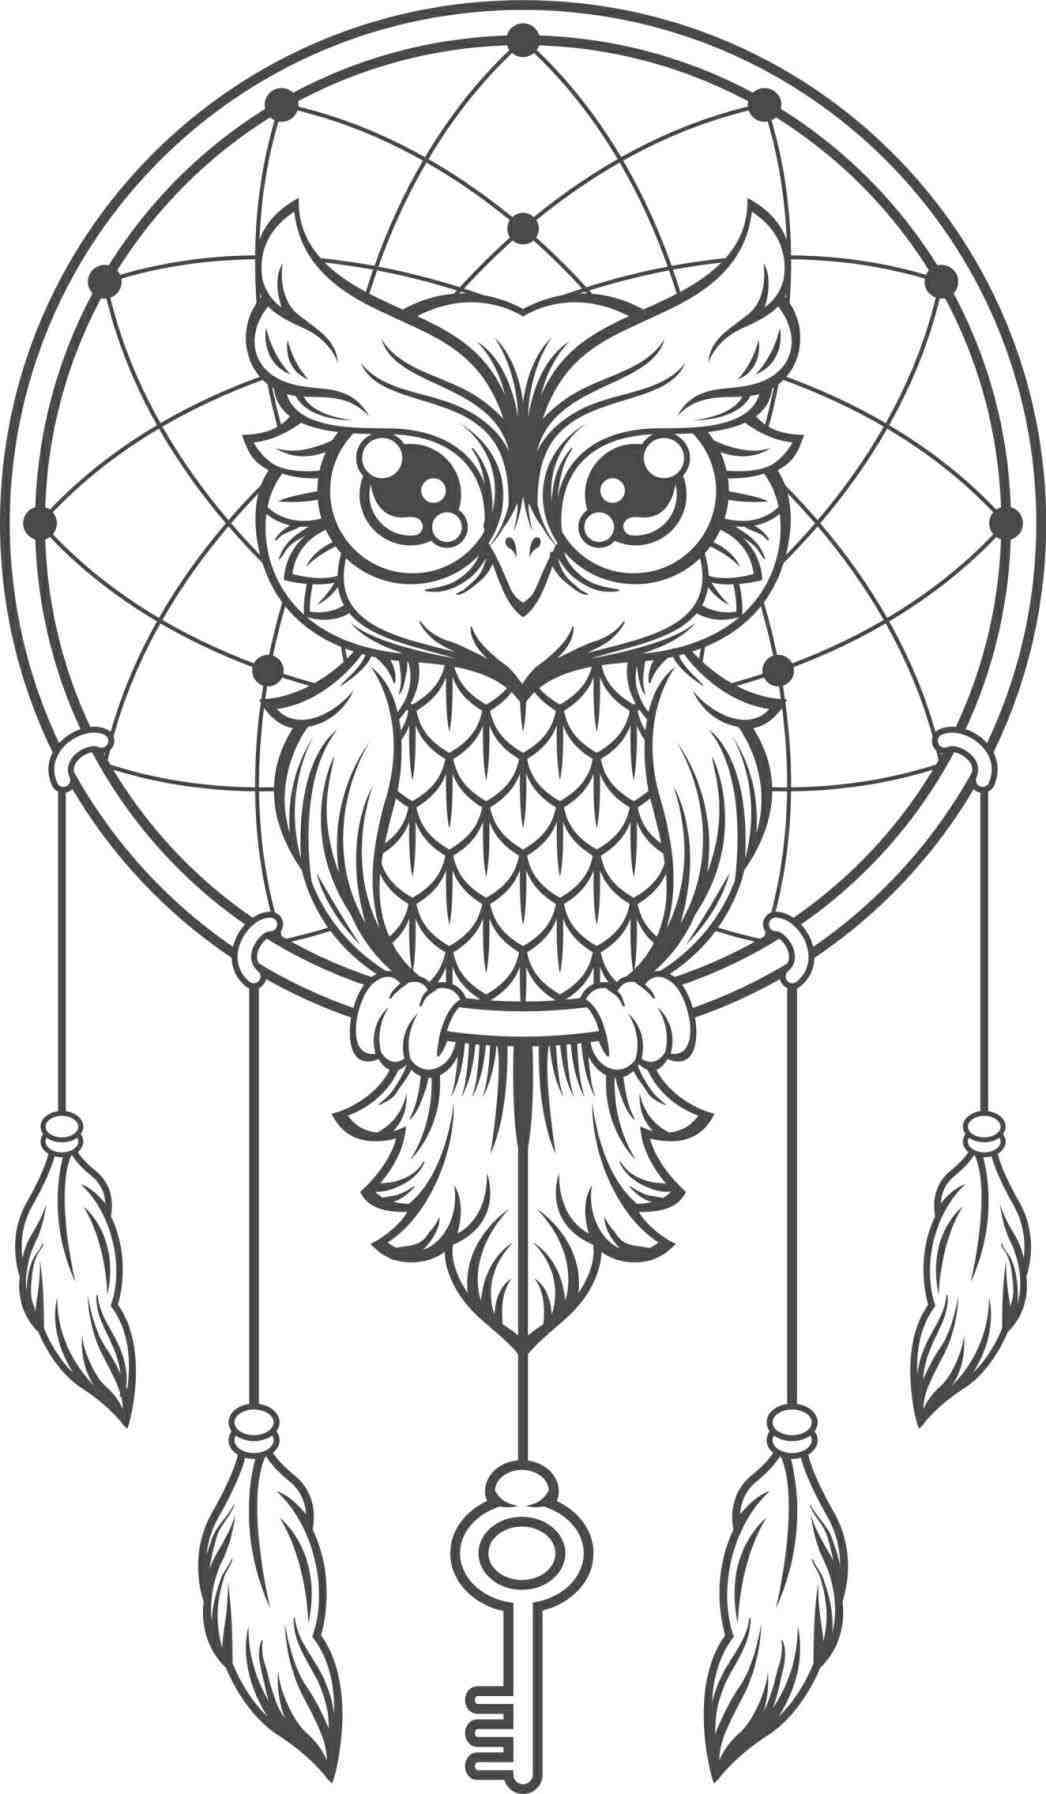 Dreamcatcher Tattoo Drawing at GetDrawings Free download